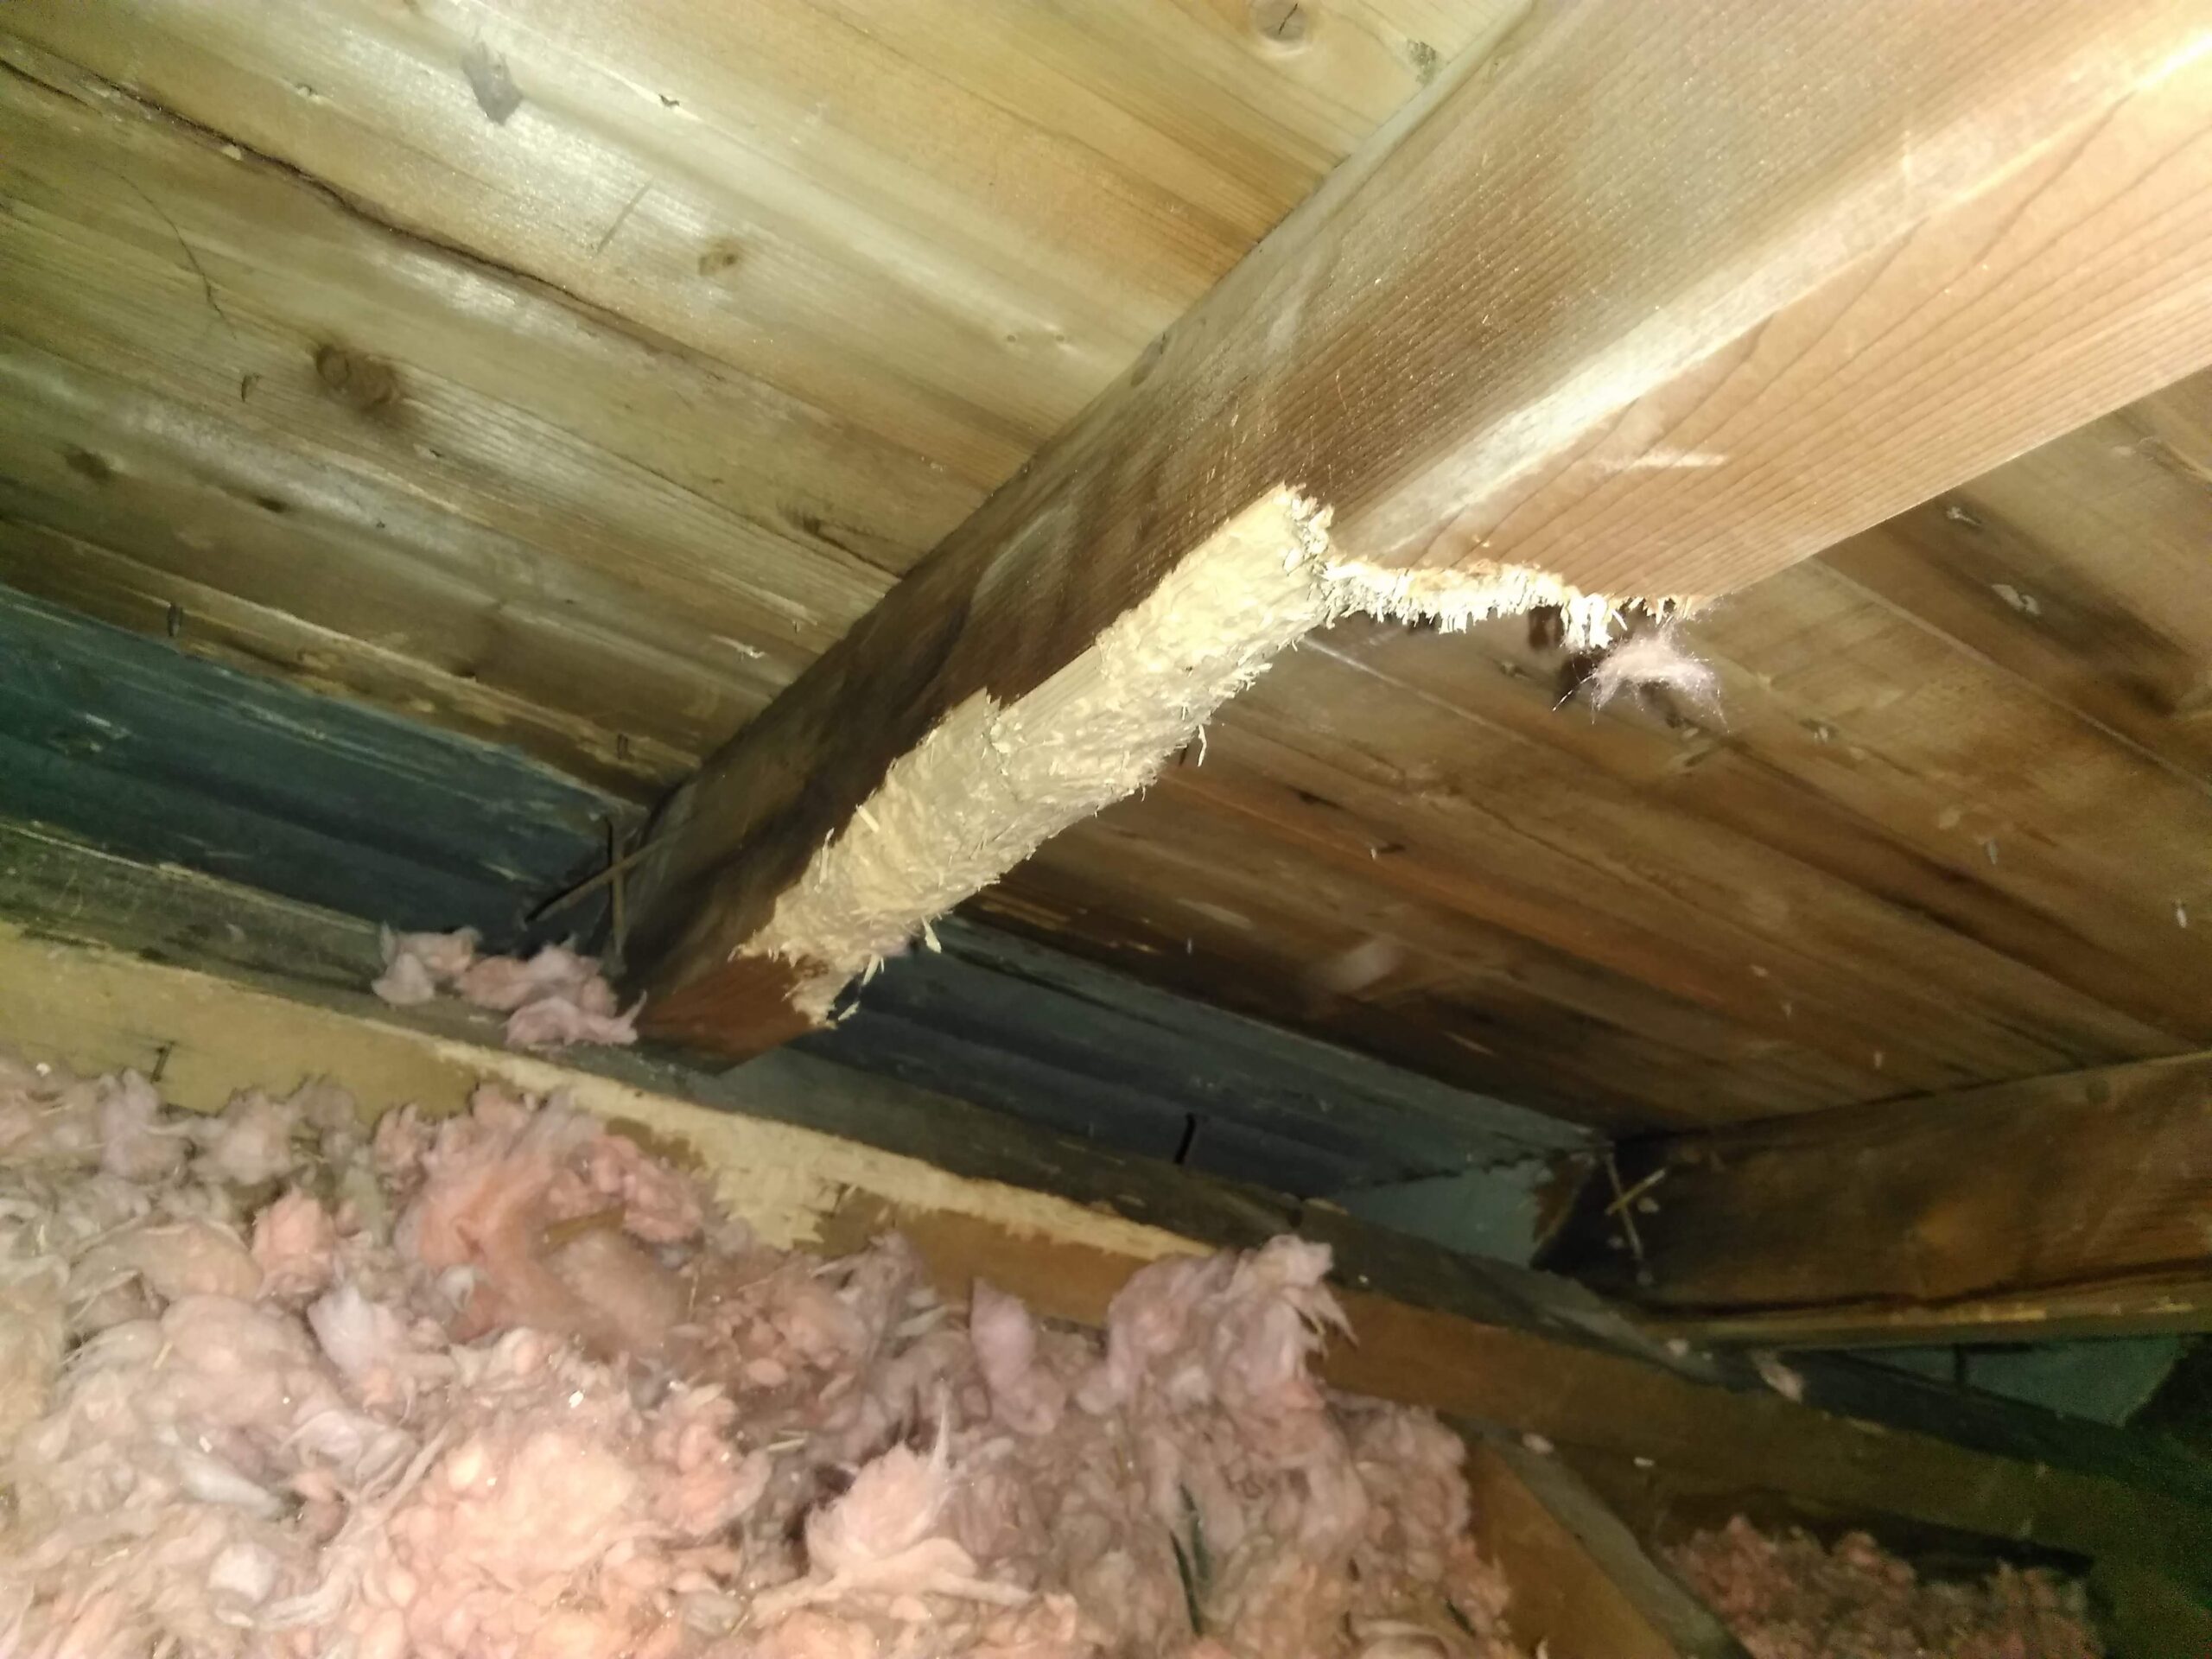 Squirrels in the Loft – What Should You Do